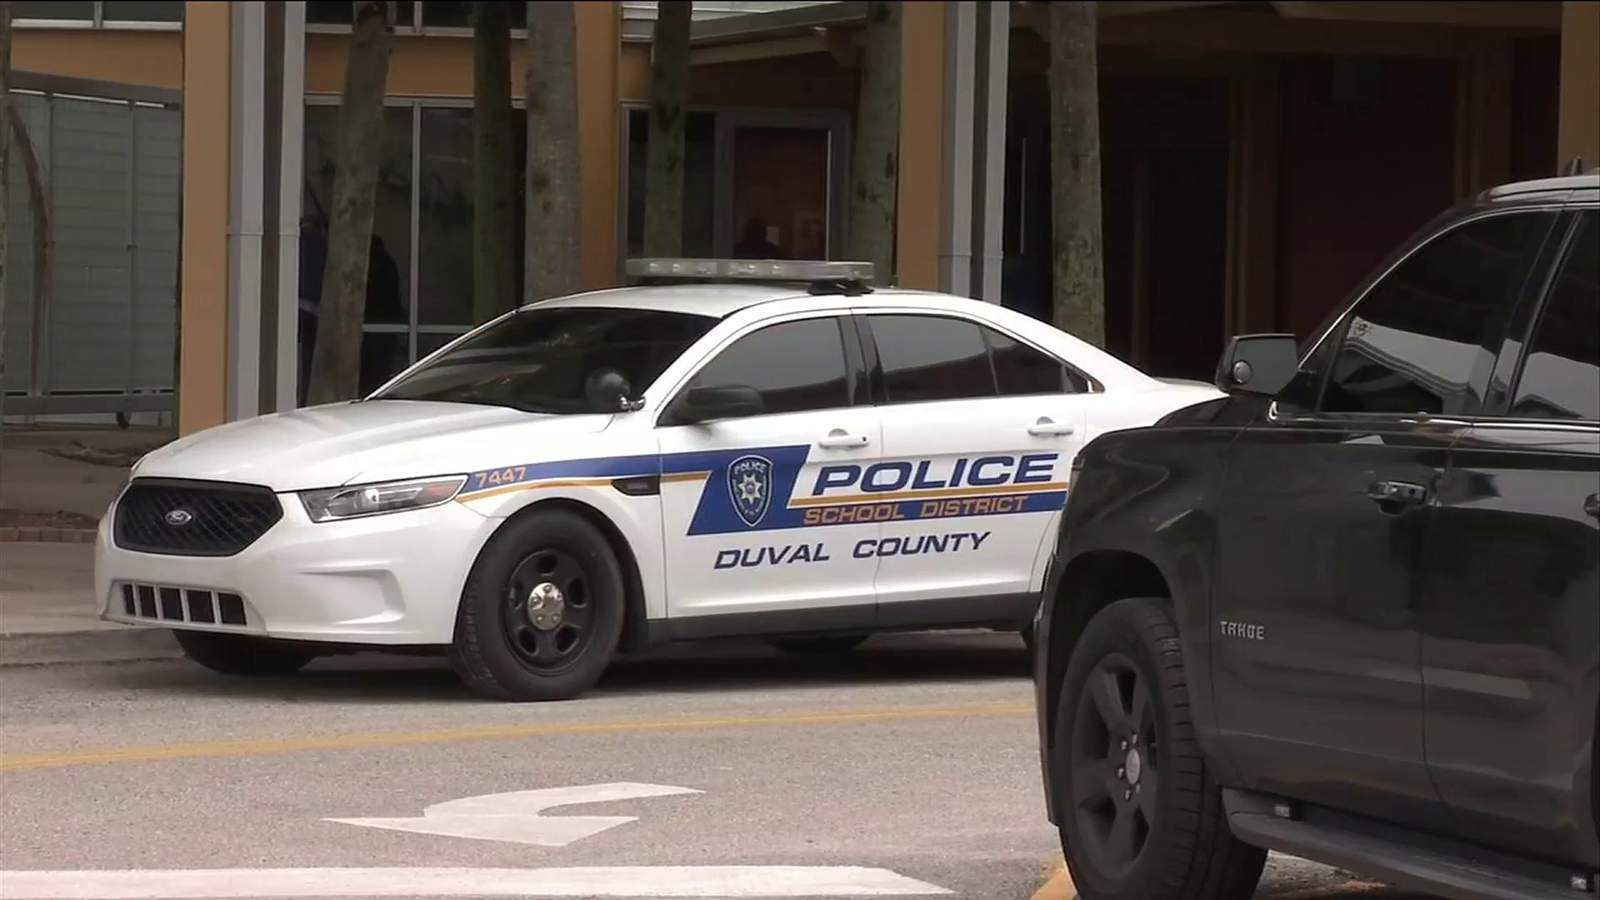 ‘Enhanced security’ planned at Duval County high schools through Friday